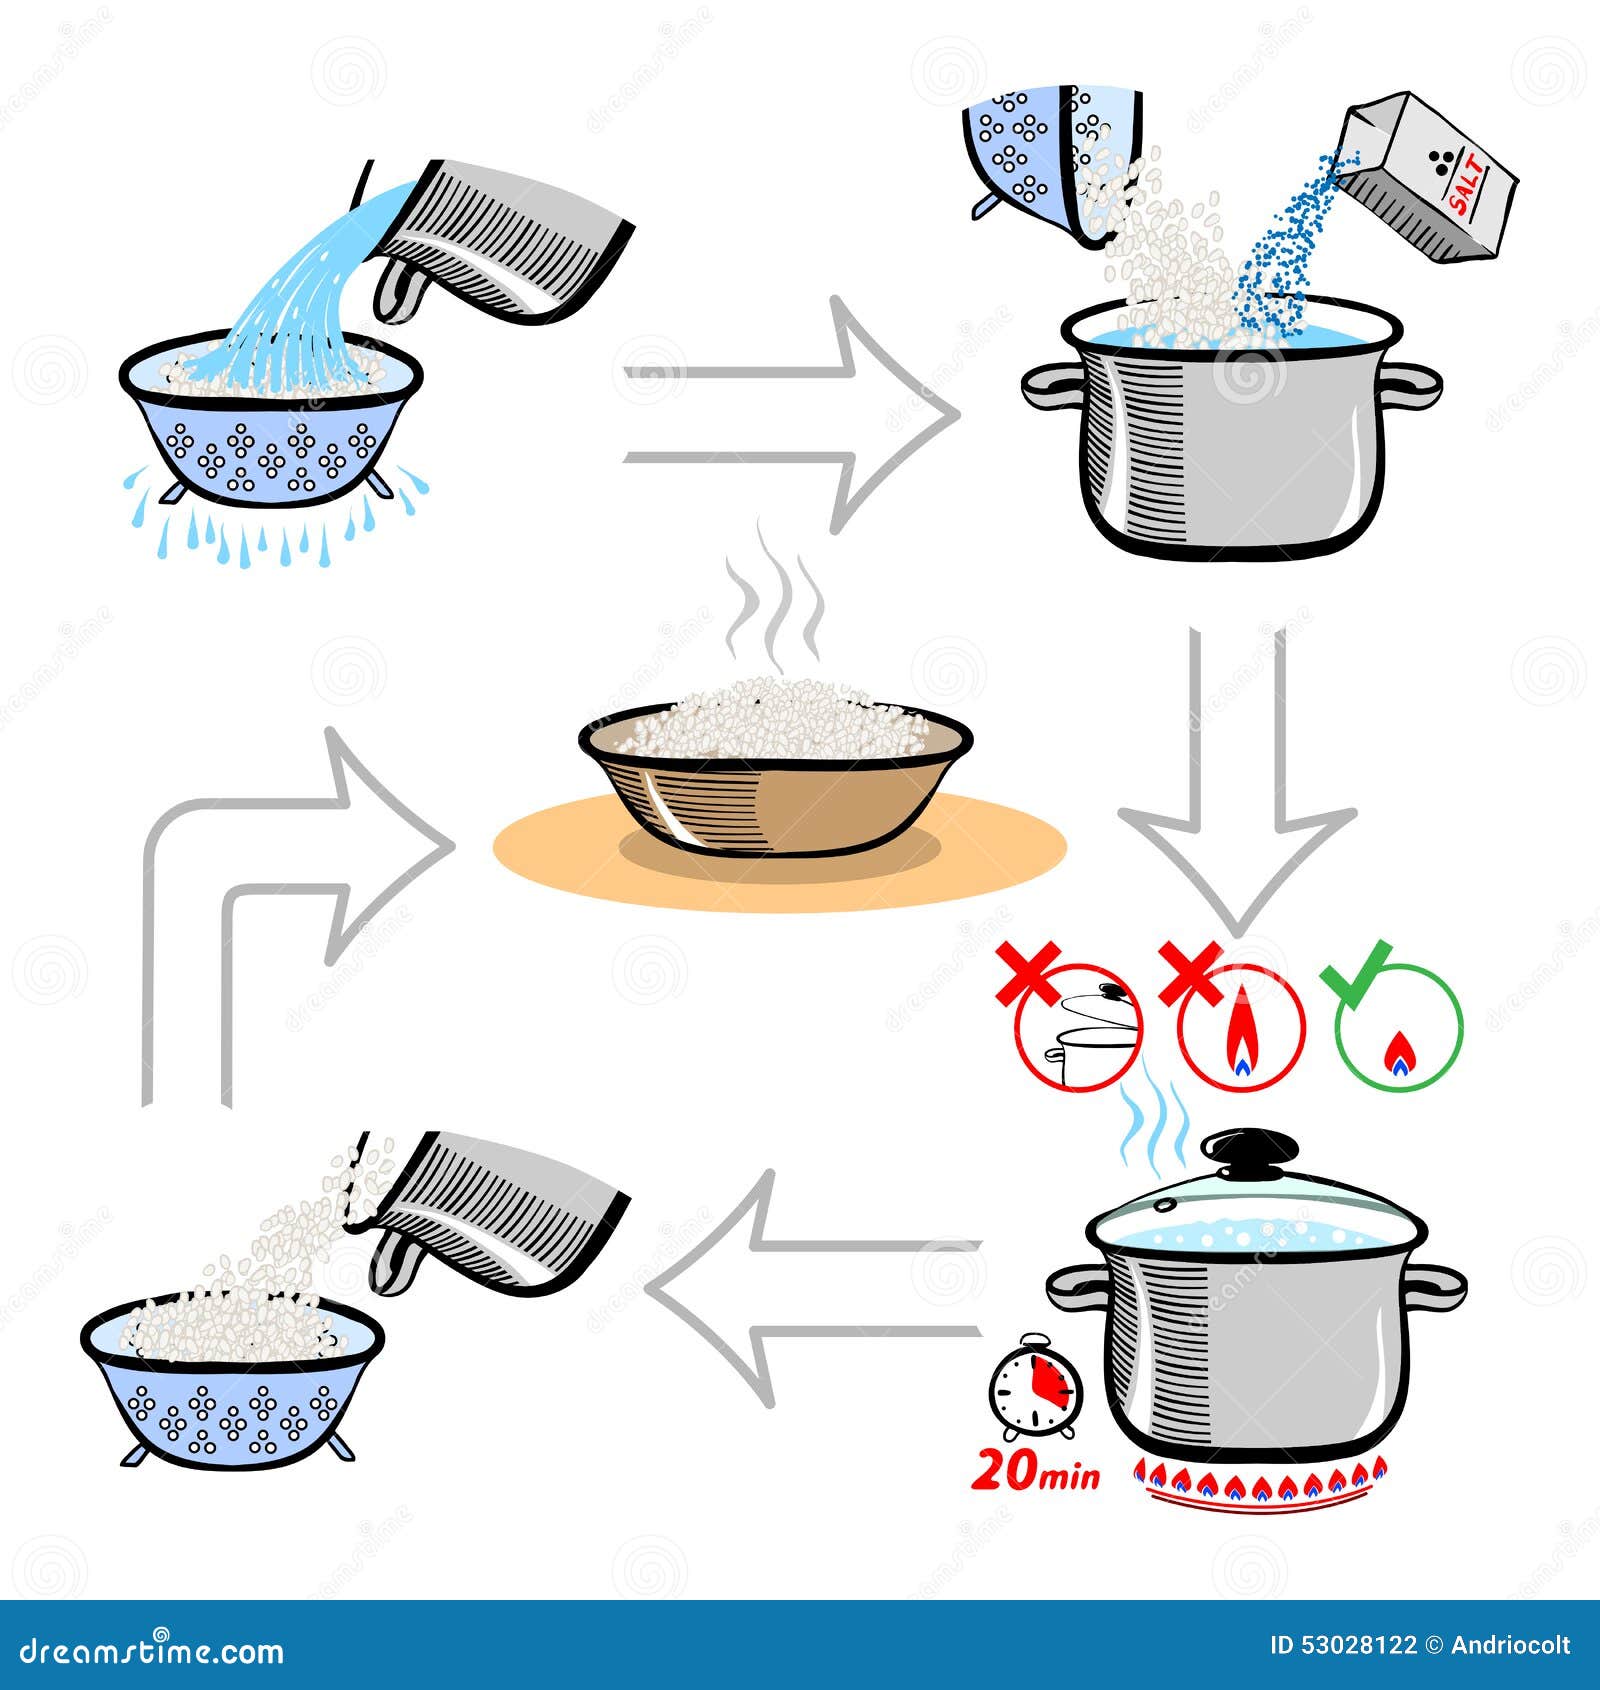 Step By Step Recipe Infographic For Cooking Rice Stock Vector Illustration Of Brew Infographics 53028122